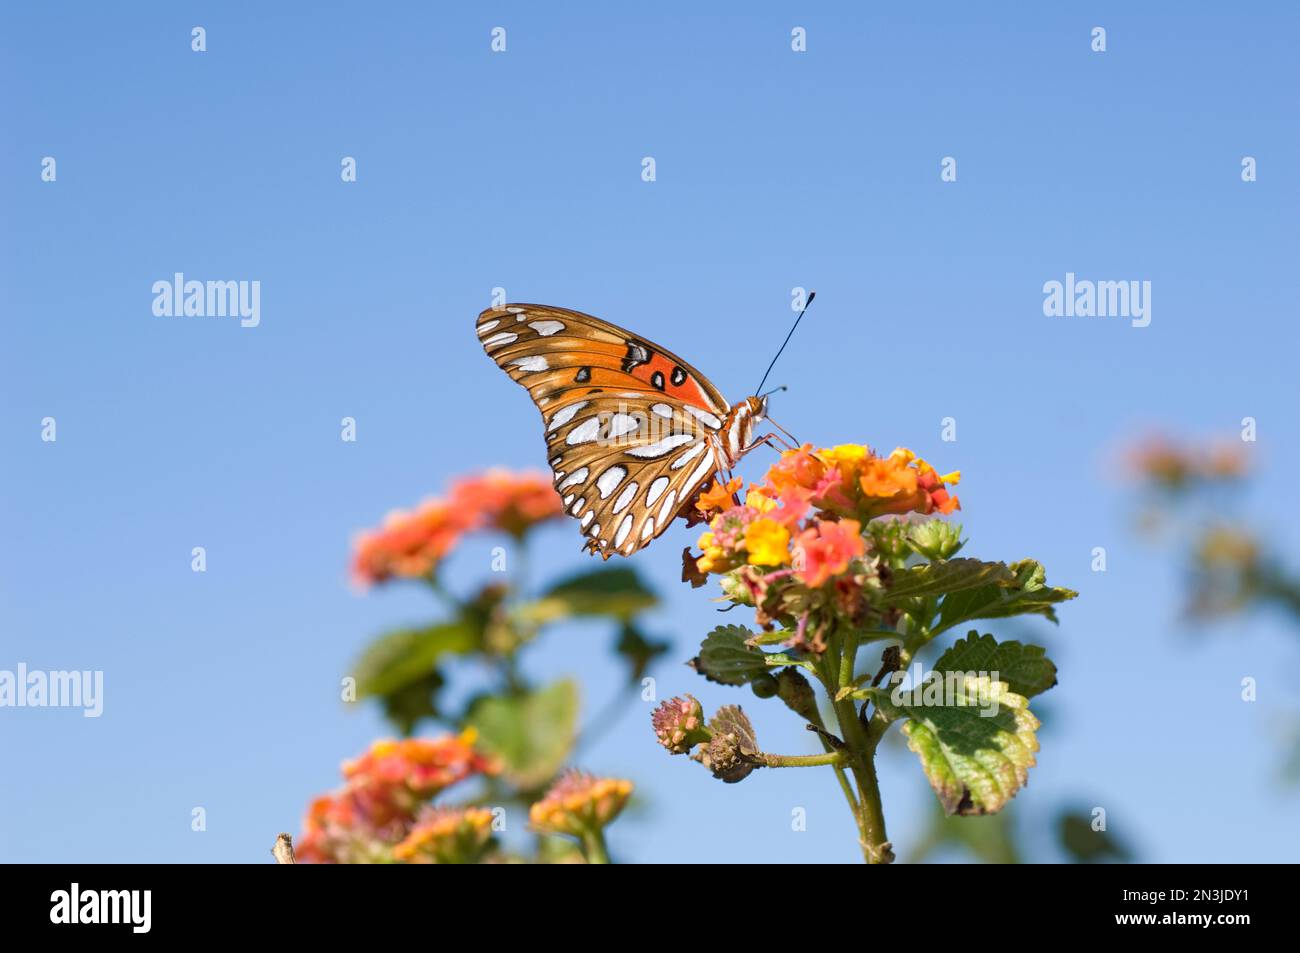 Close-up of a Gulf fritillary butterfly (Dione vanillae) resting on blossoms at the Fort Morgan State Historical Site Stock Photo